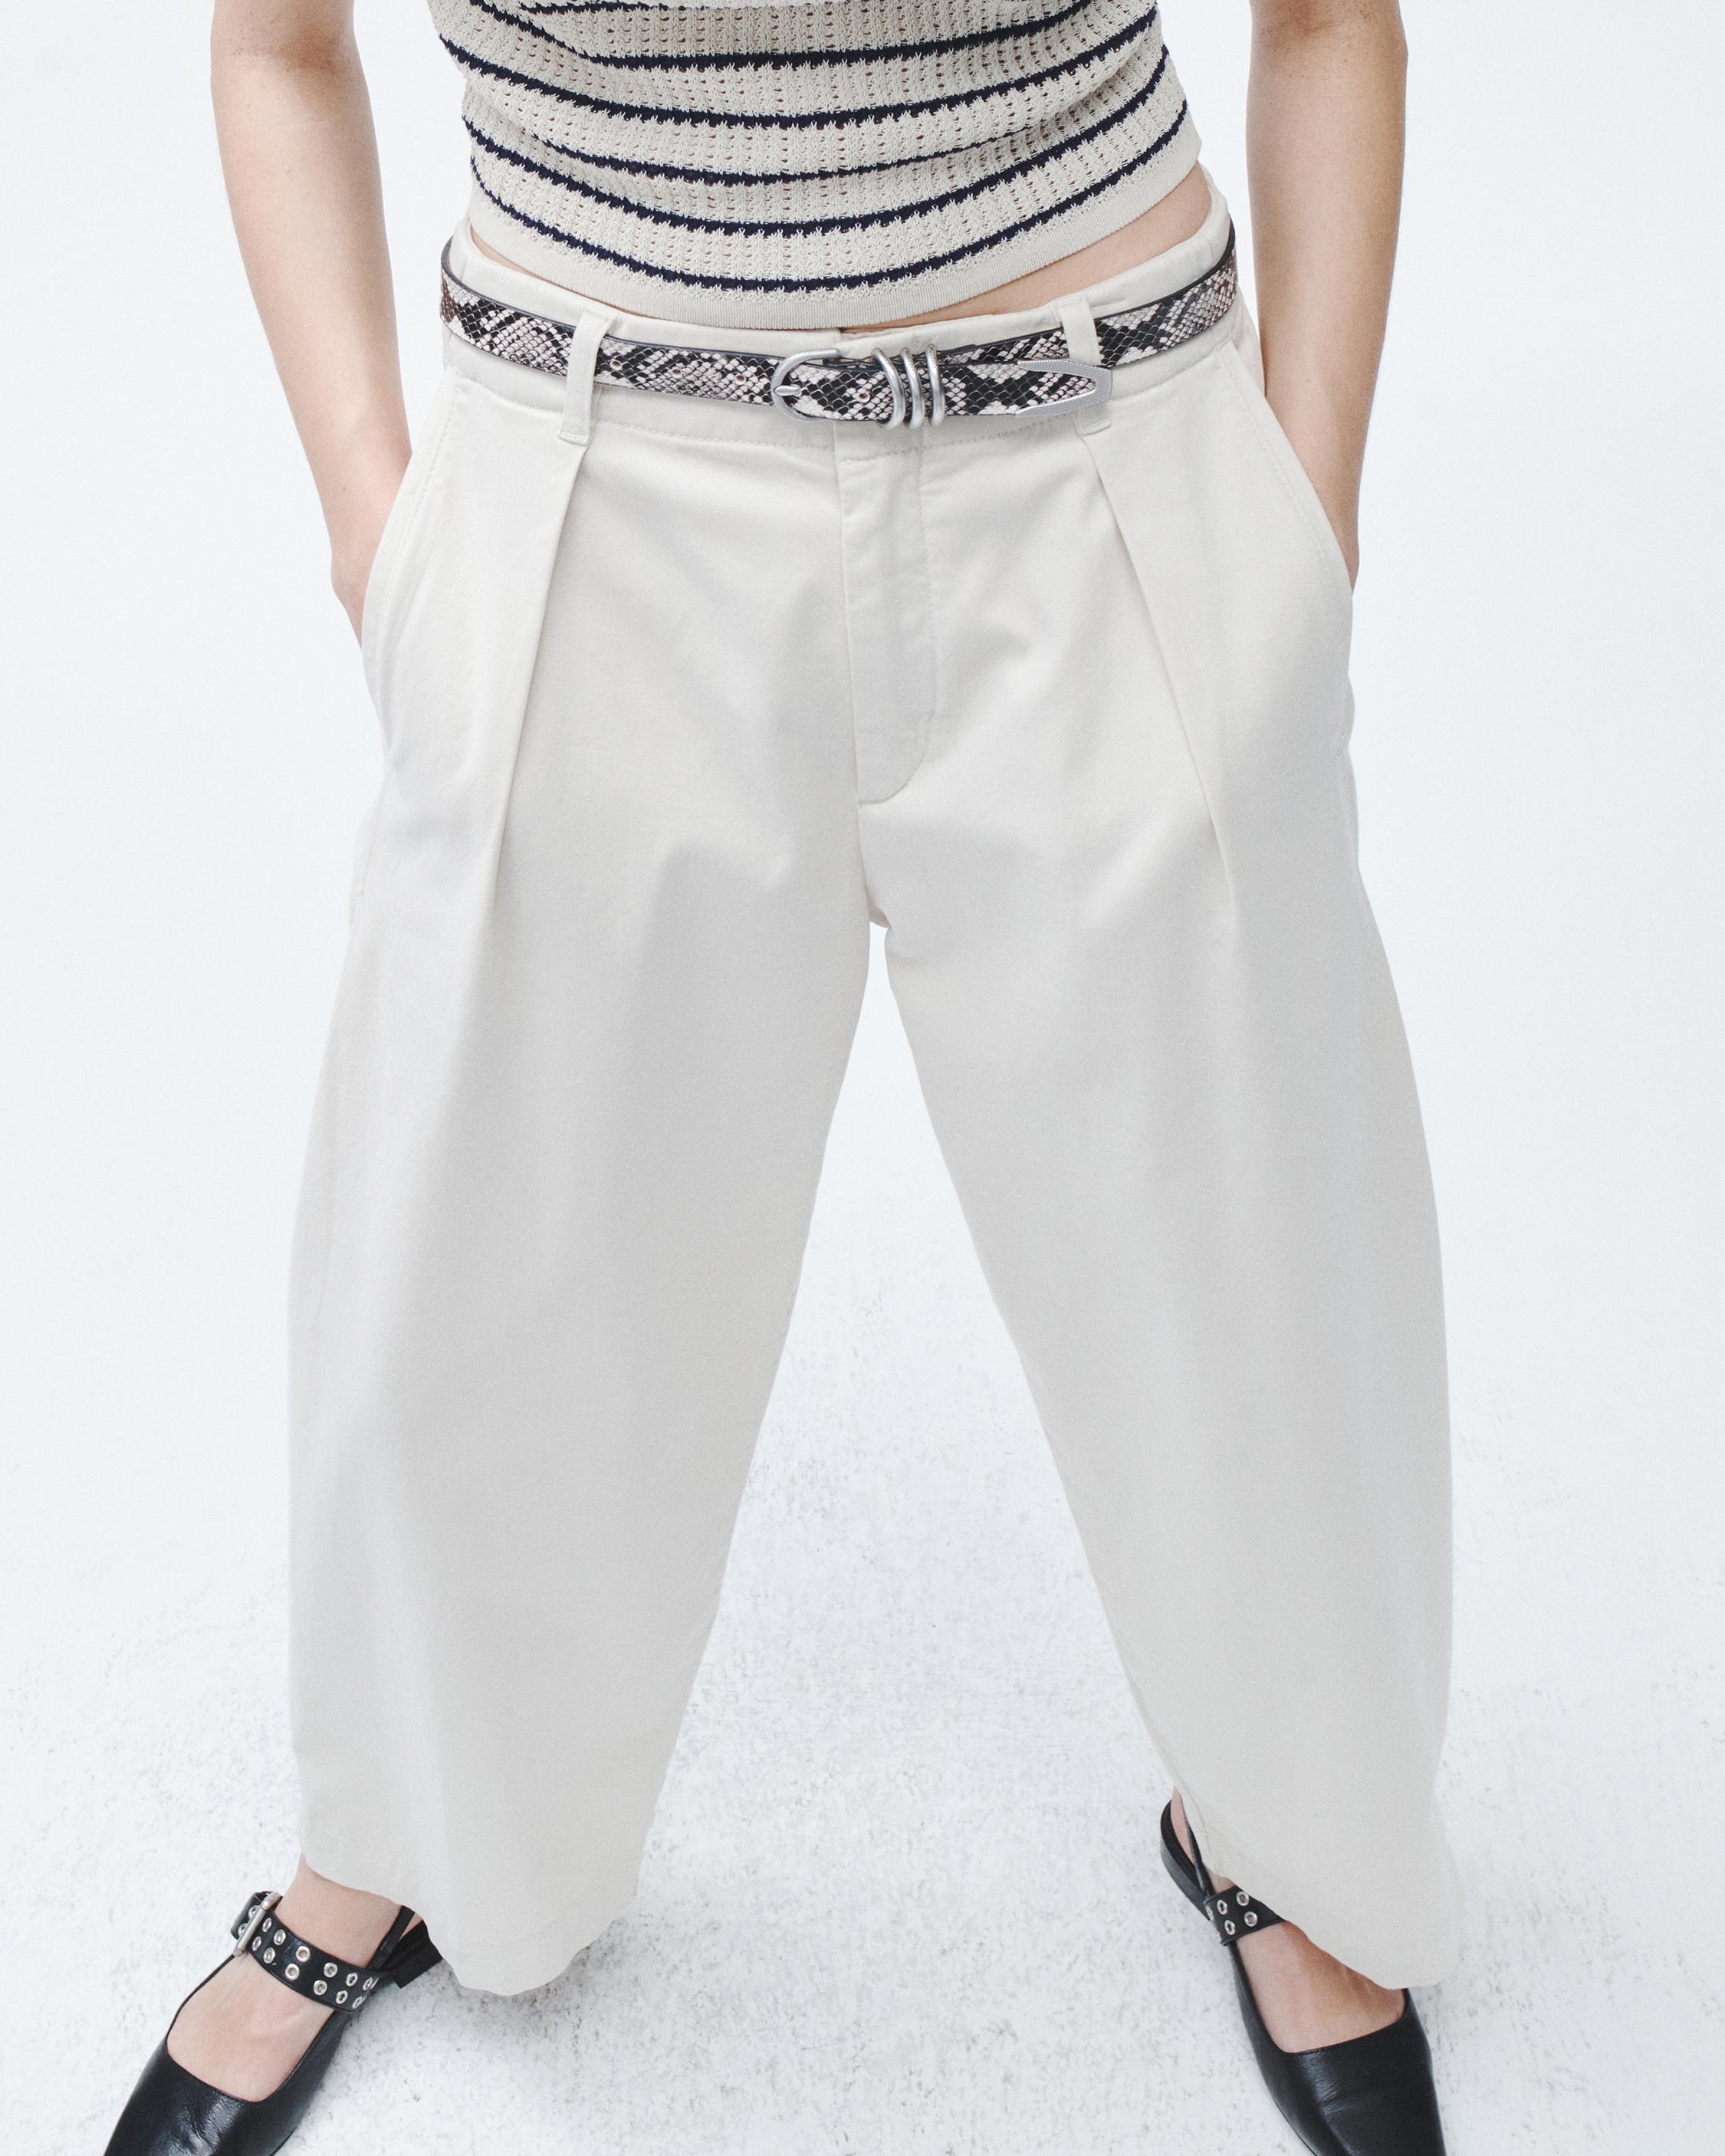 Donovan Cropped Cotton Pant
Relaxed Fit - 5